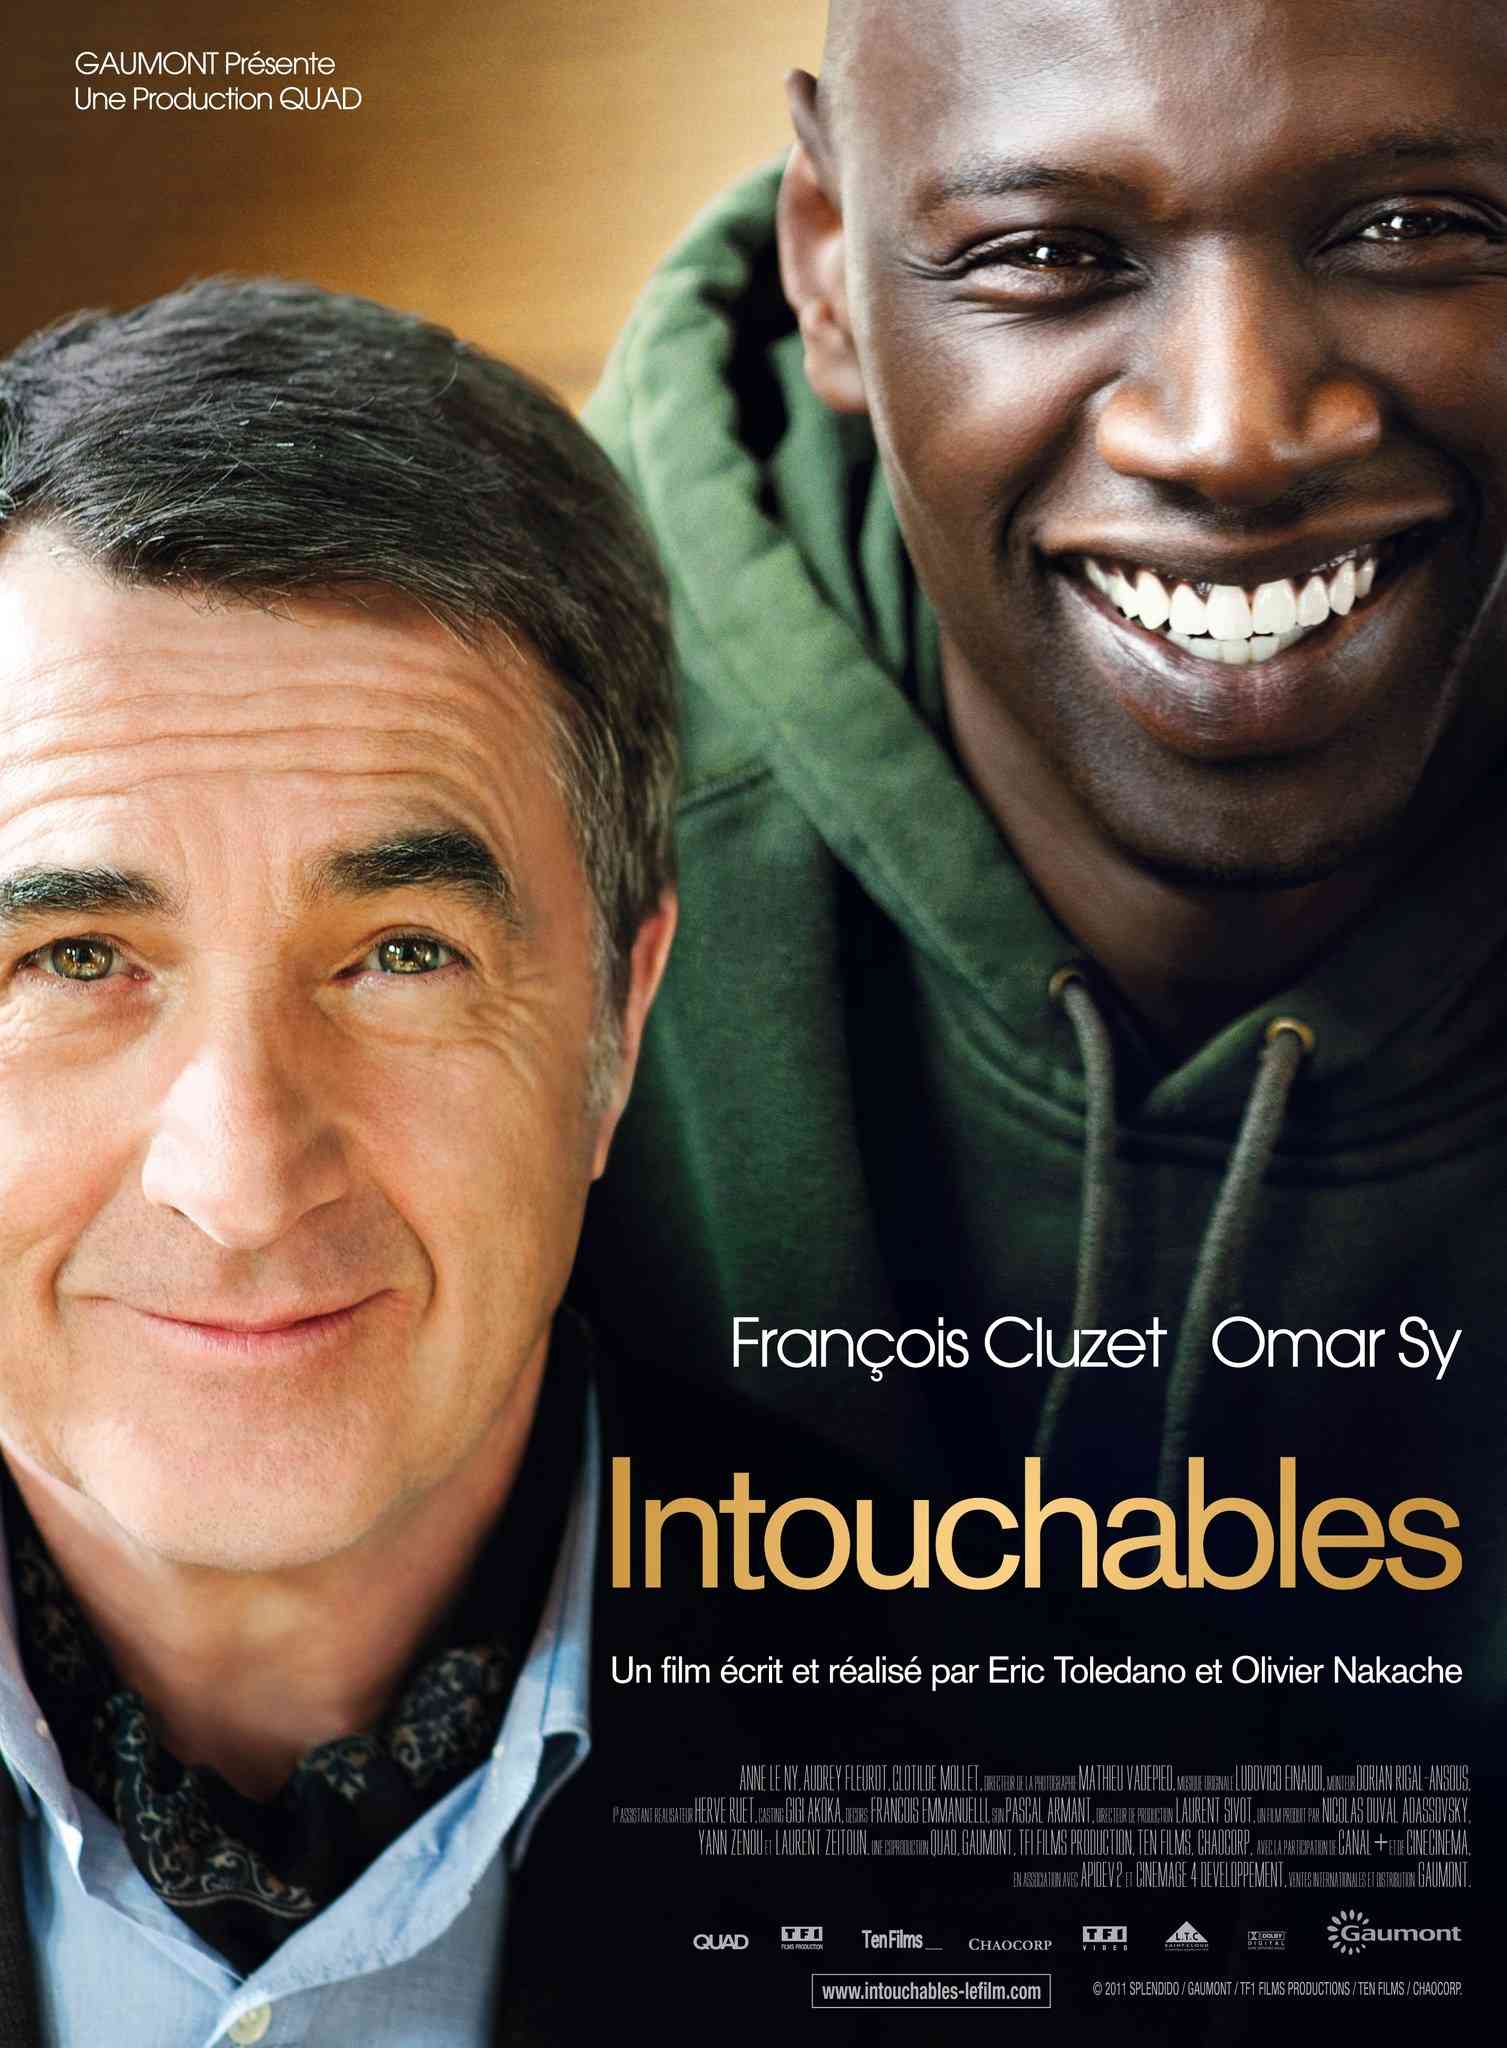 FULL MOVIE: The Intouchables (2011) [French]